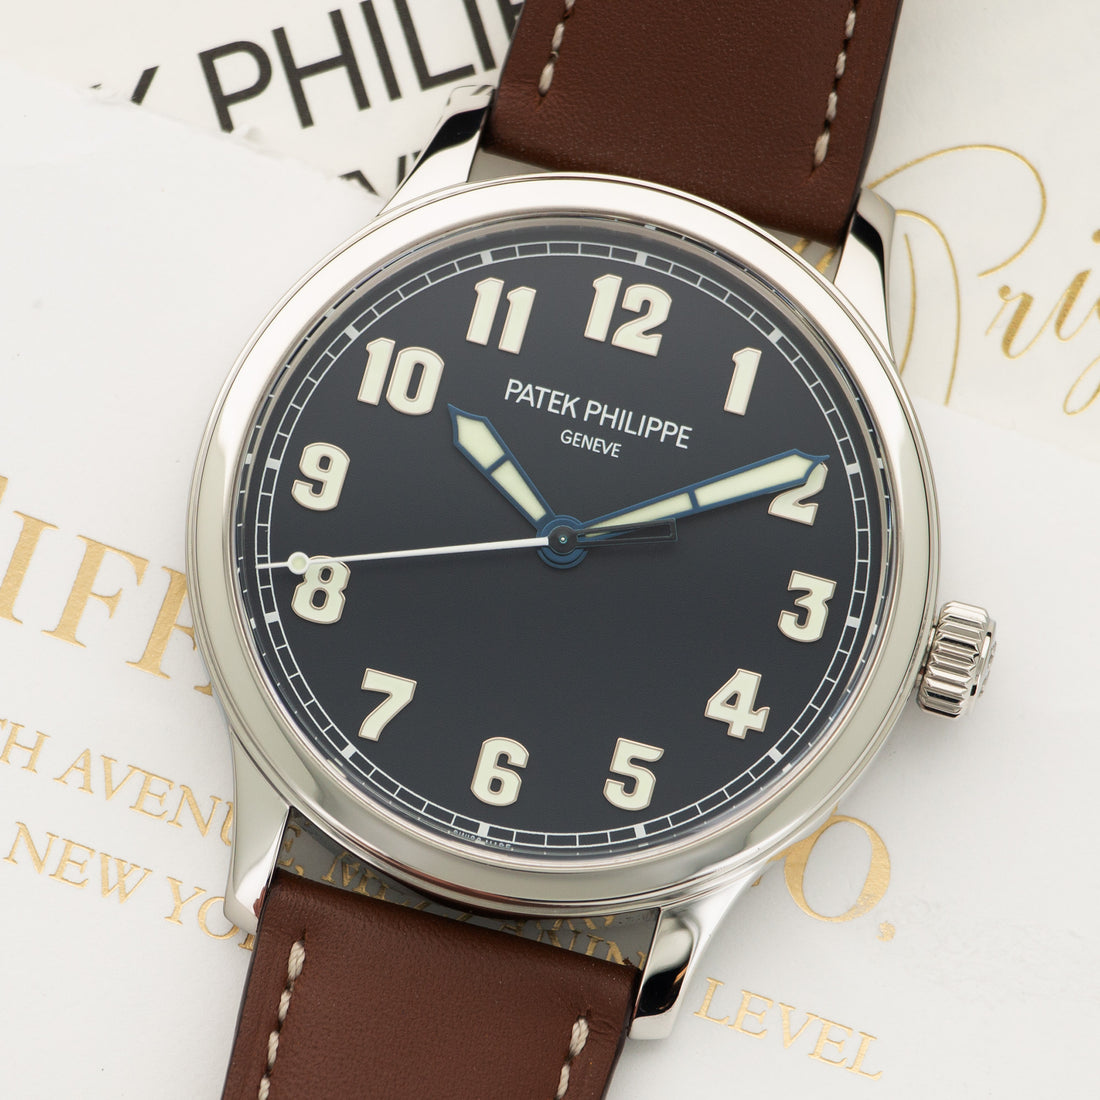 Patek Philippe Stainless Steel Pilot Watch Ref. 5522 Retailed by Tiffany & Co.